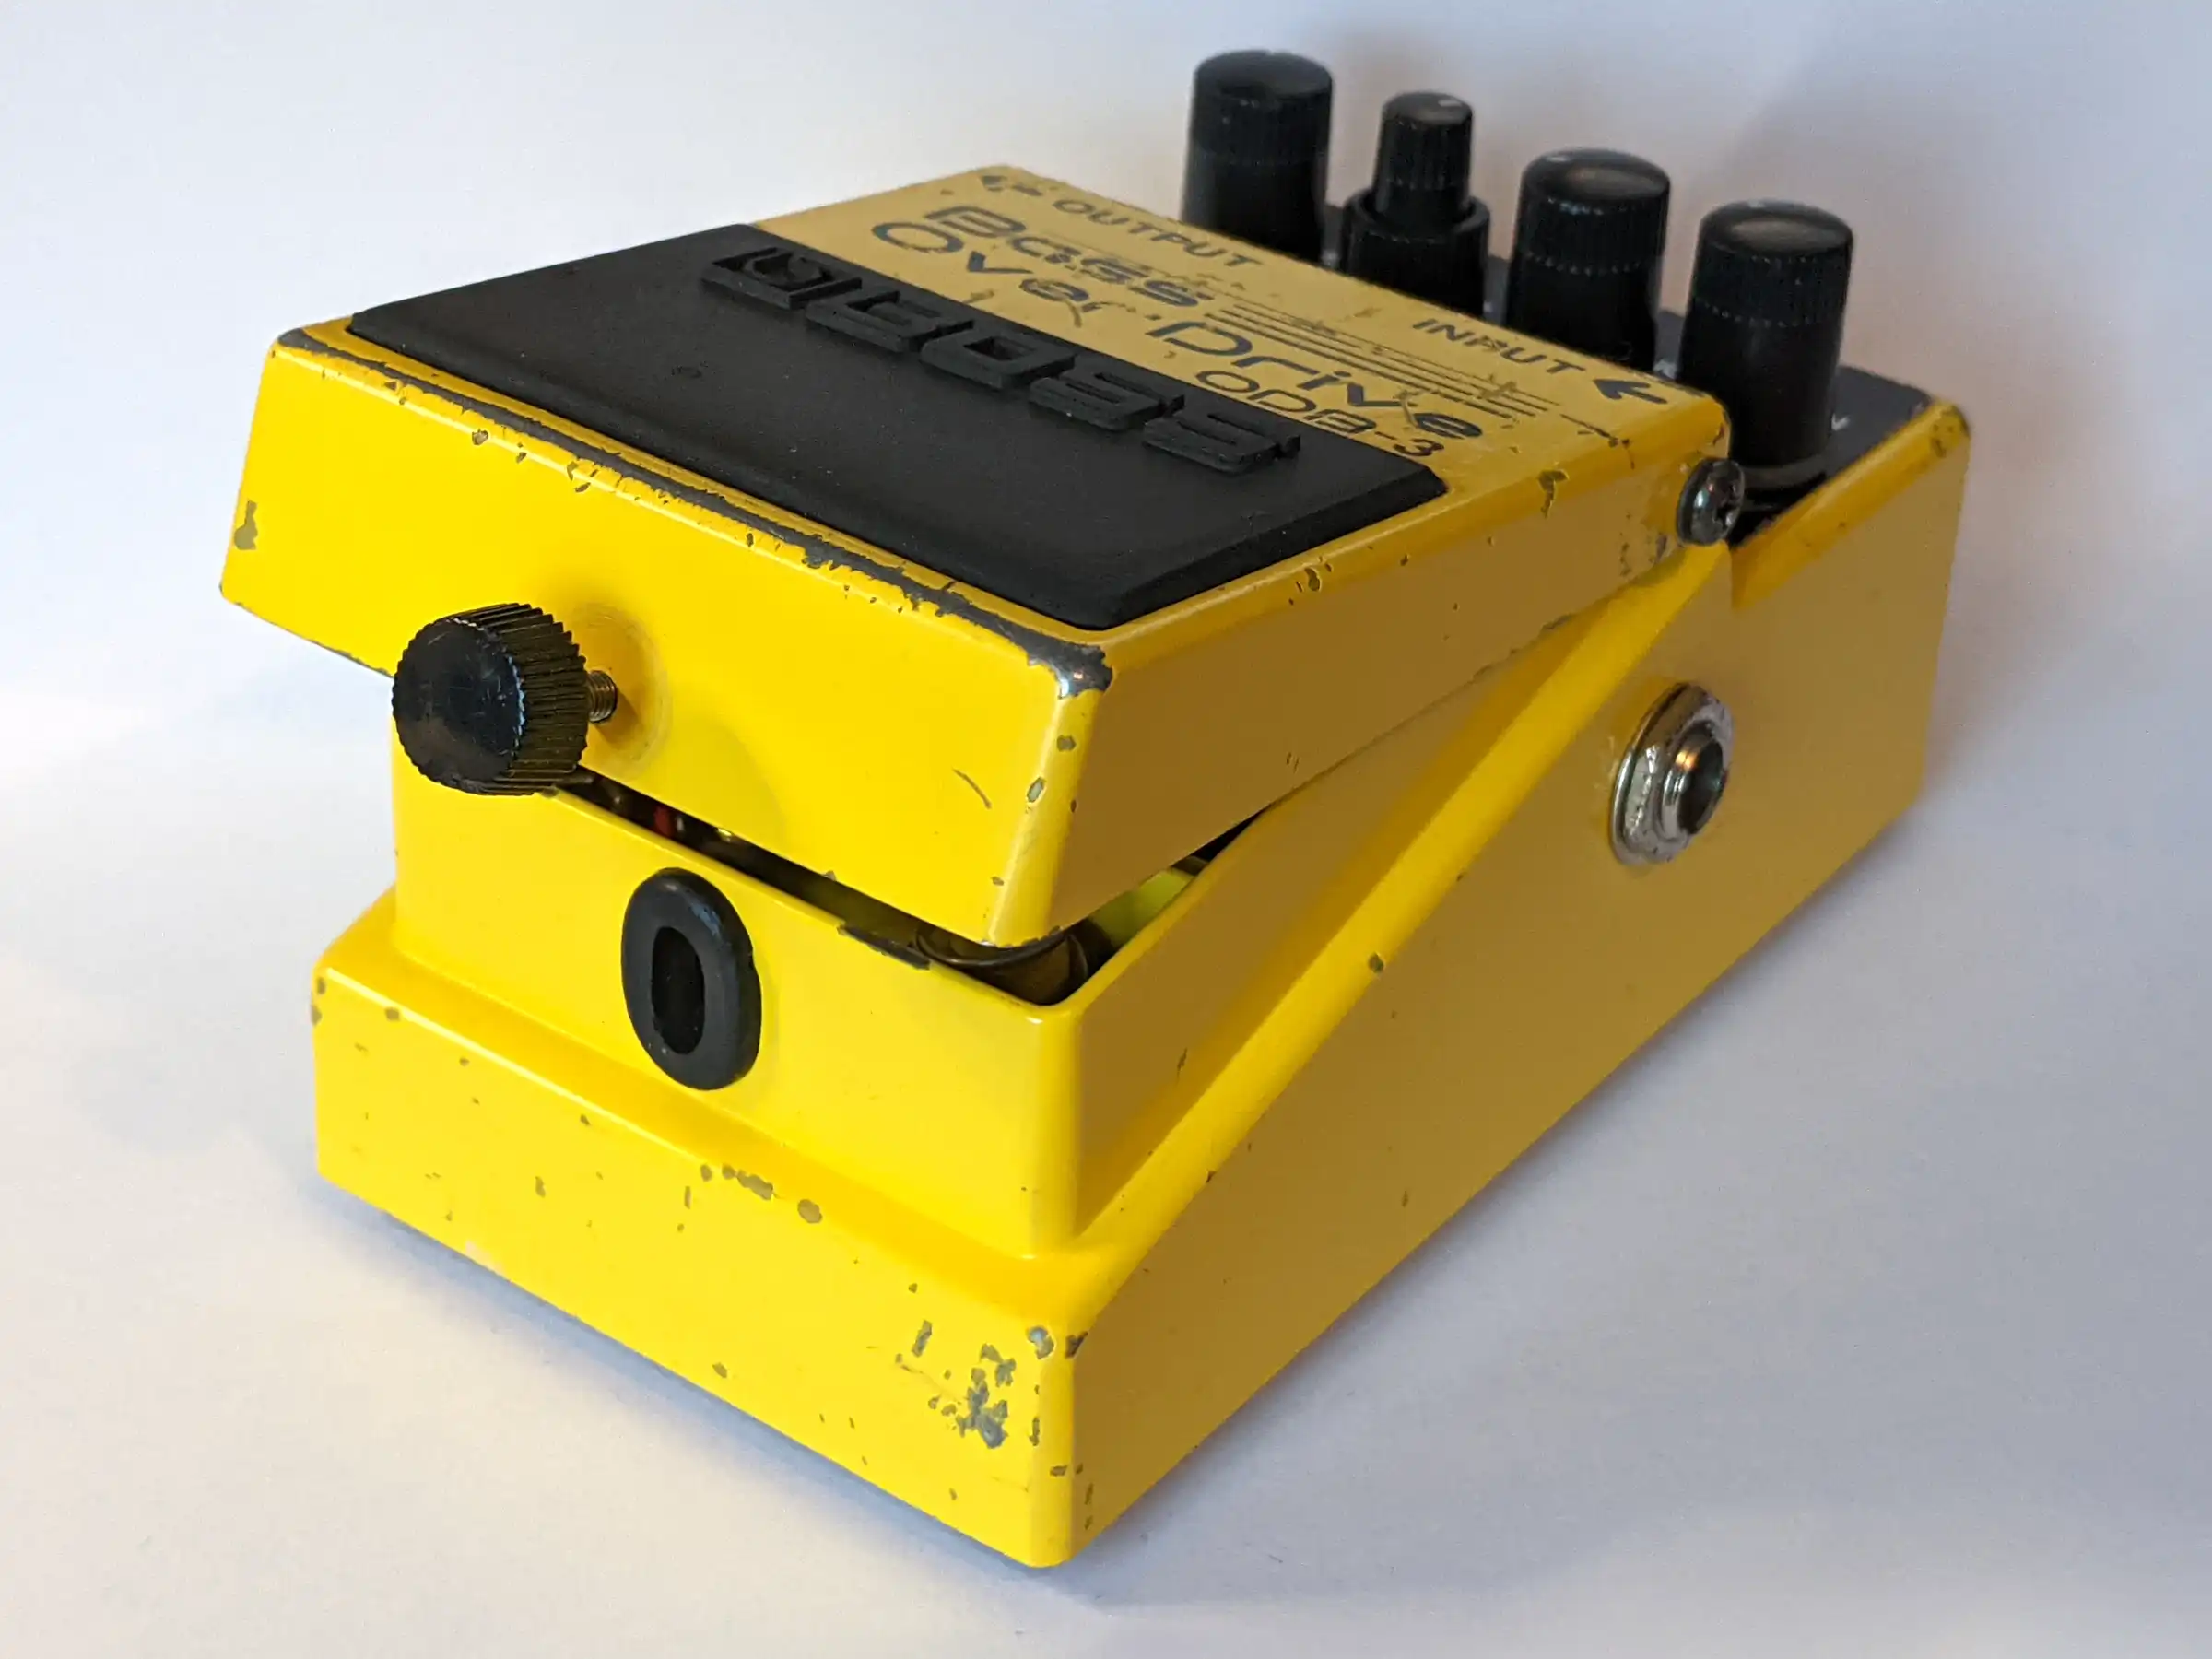 A Boss guitar (well, bass) effects pedal with the footswitch door opened
up and a new rubber grommet fitted to the aperture into which the thumbscrew
fits.